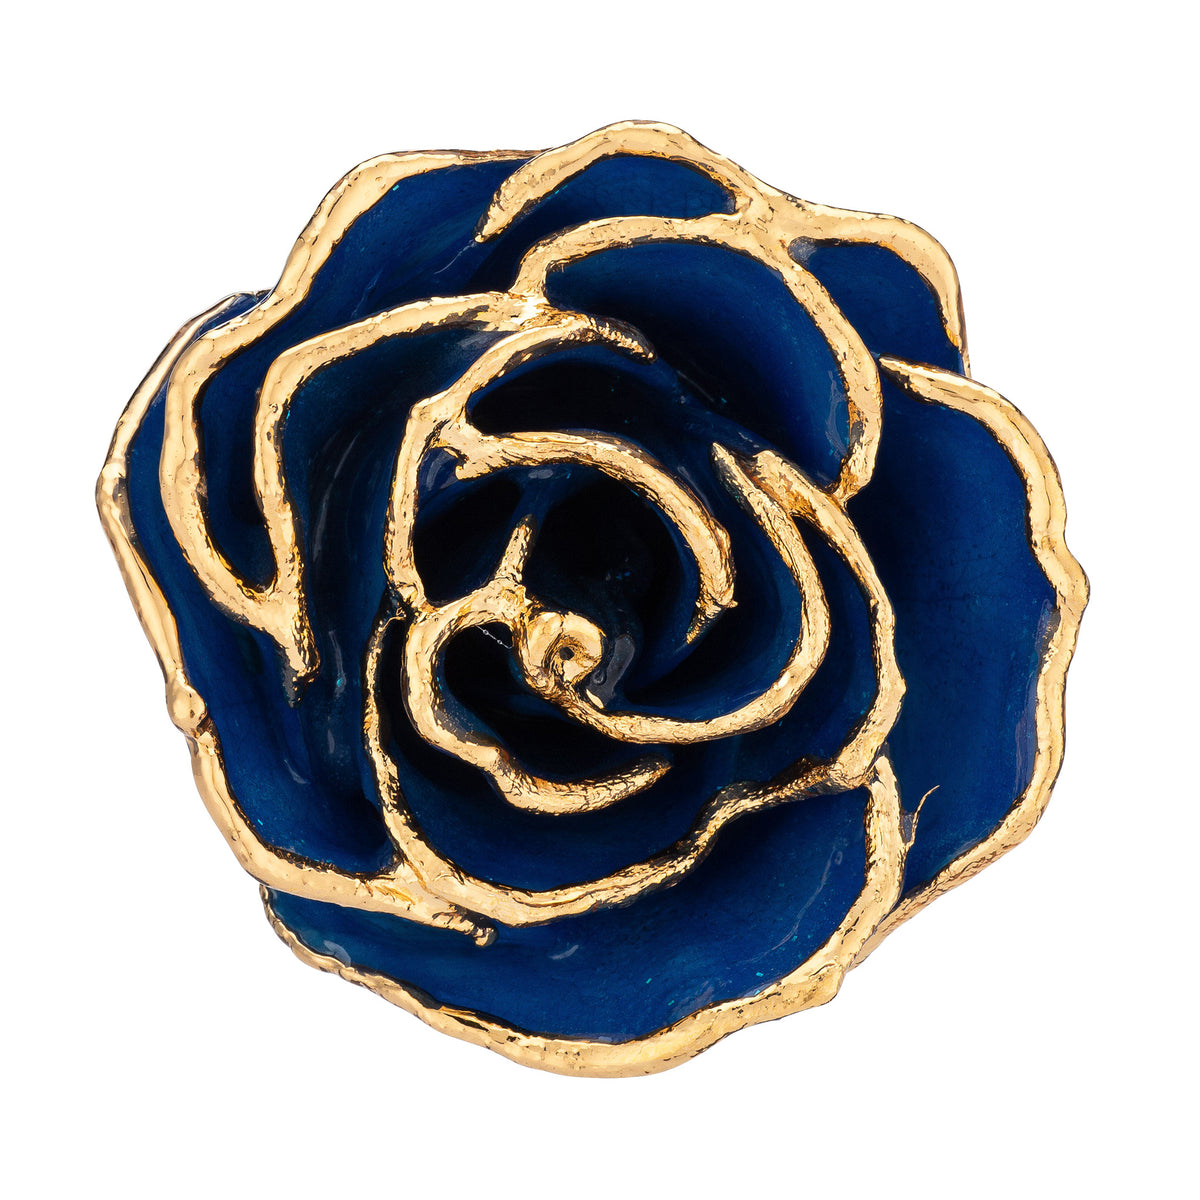 24K Gold Trimmed Forever Rose with Sapphire Blue Petals with Sapphire Suspended Sparkles. View of Stem, Leaves, and Rose Petals and Showing Detail of Gold Trim view from top looking down into petals